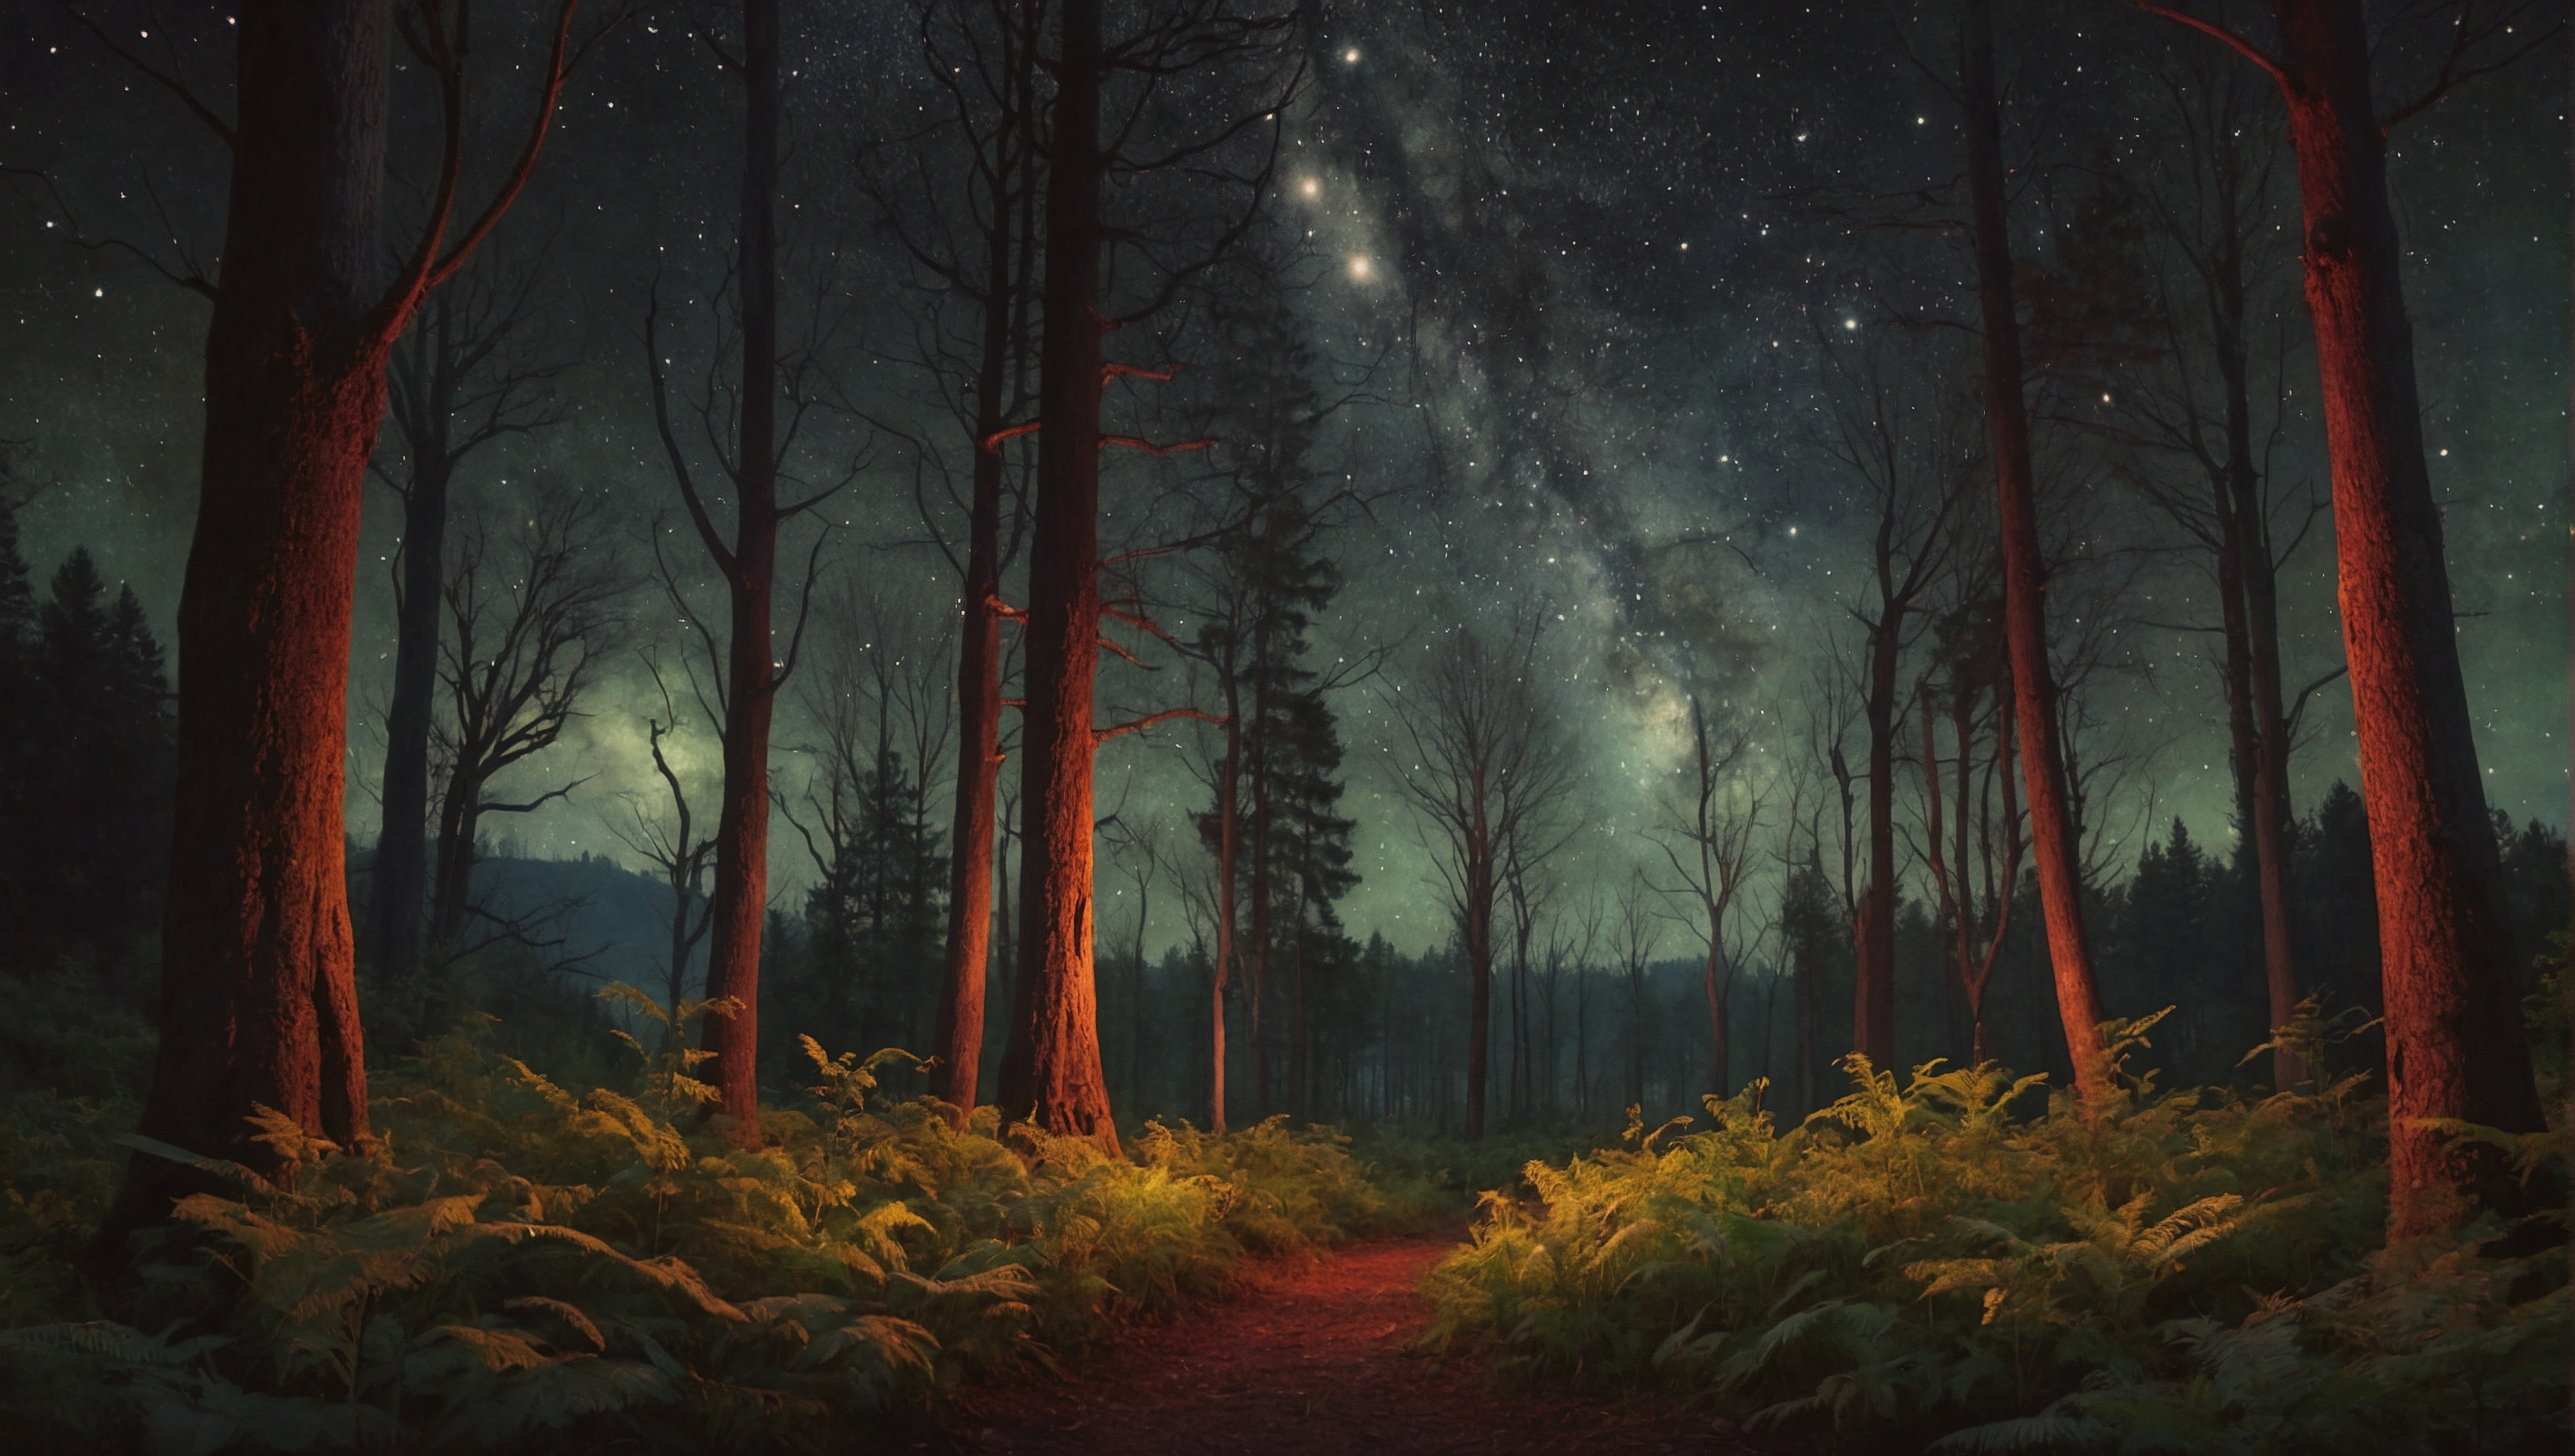 A path through the woods and stars in the night sky.